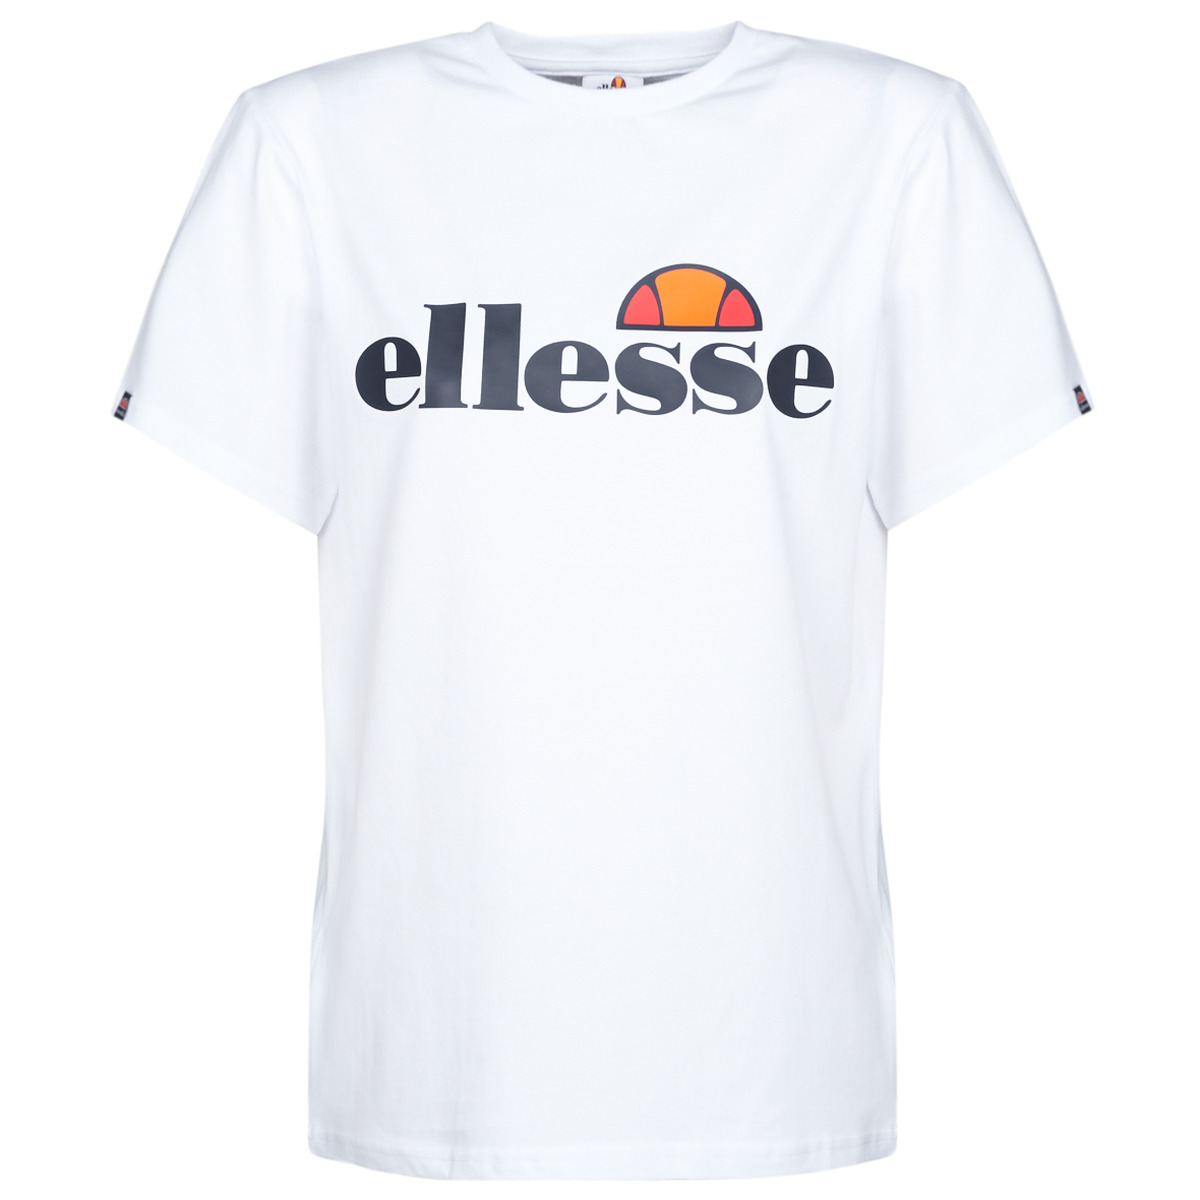 Ellesse ALBANY - | t-shirts White - NET short-sleeved delivery ! Clothing Women Free Spartoo